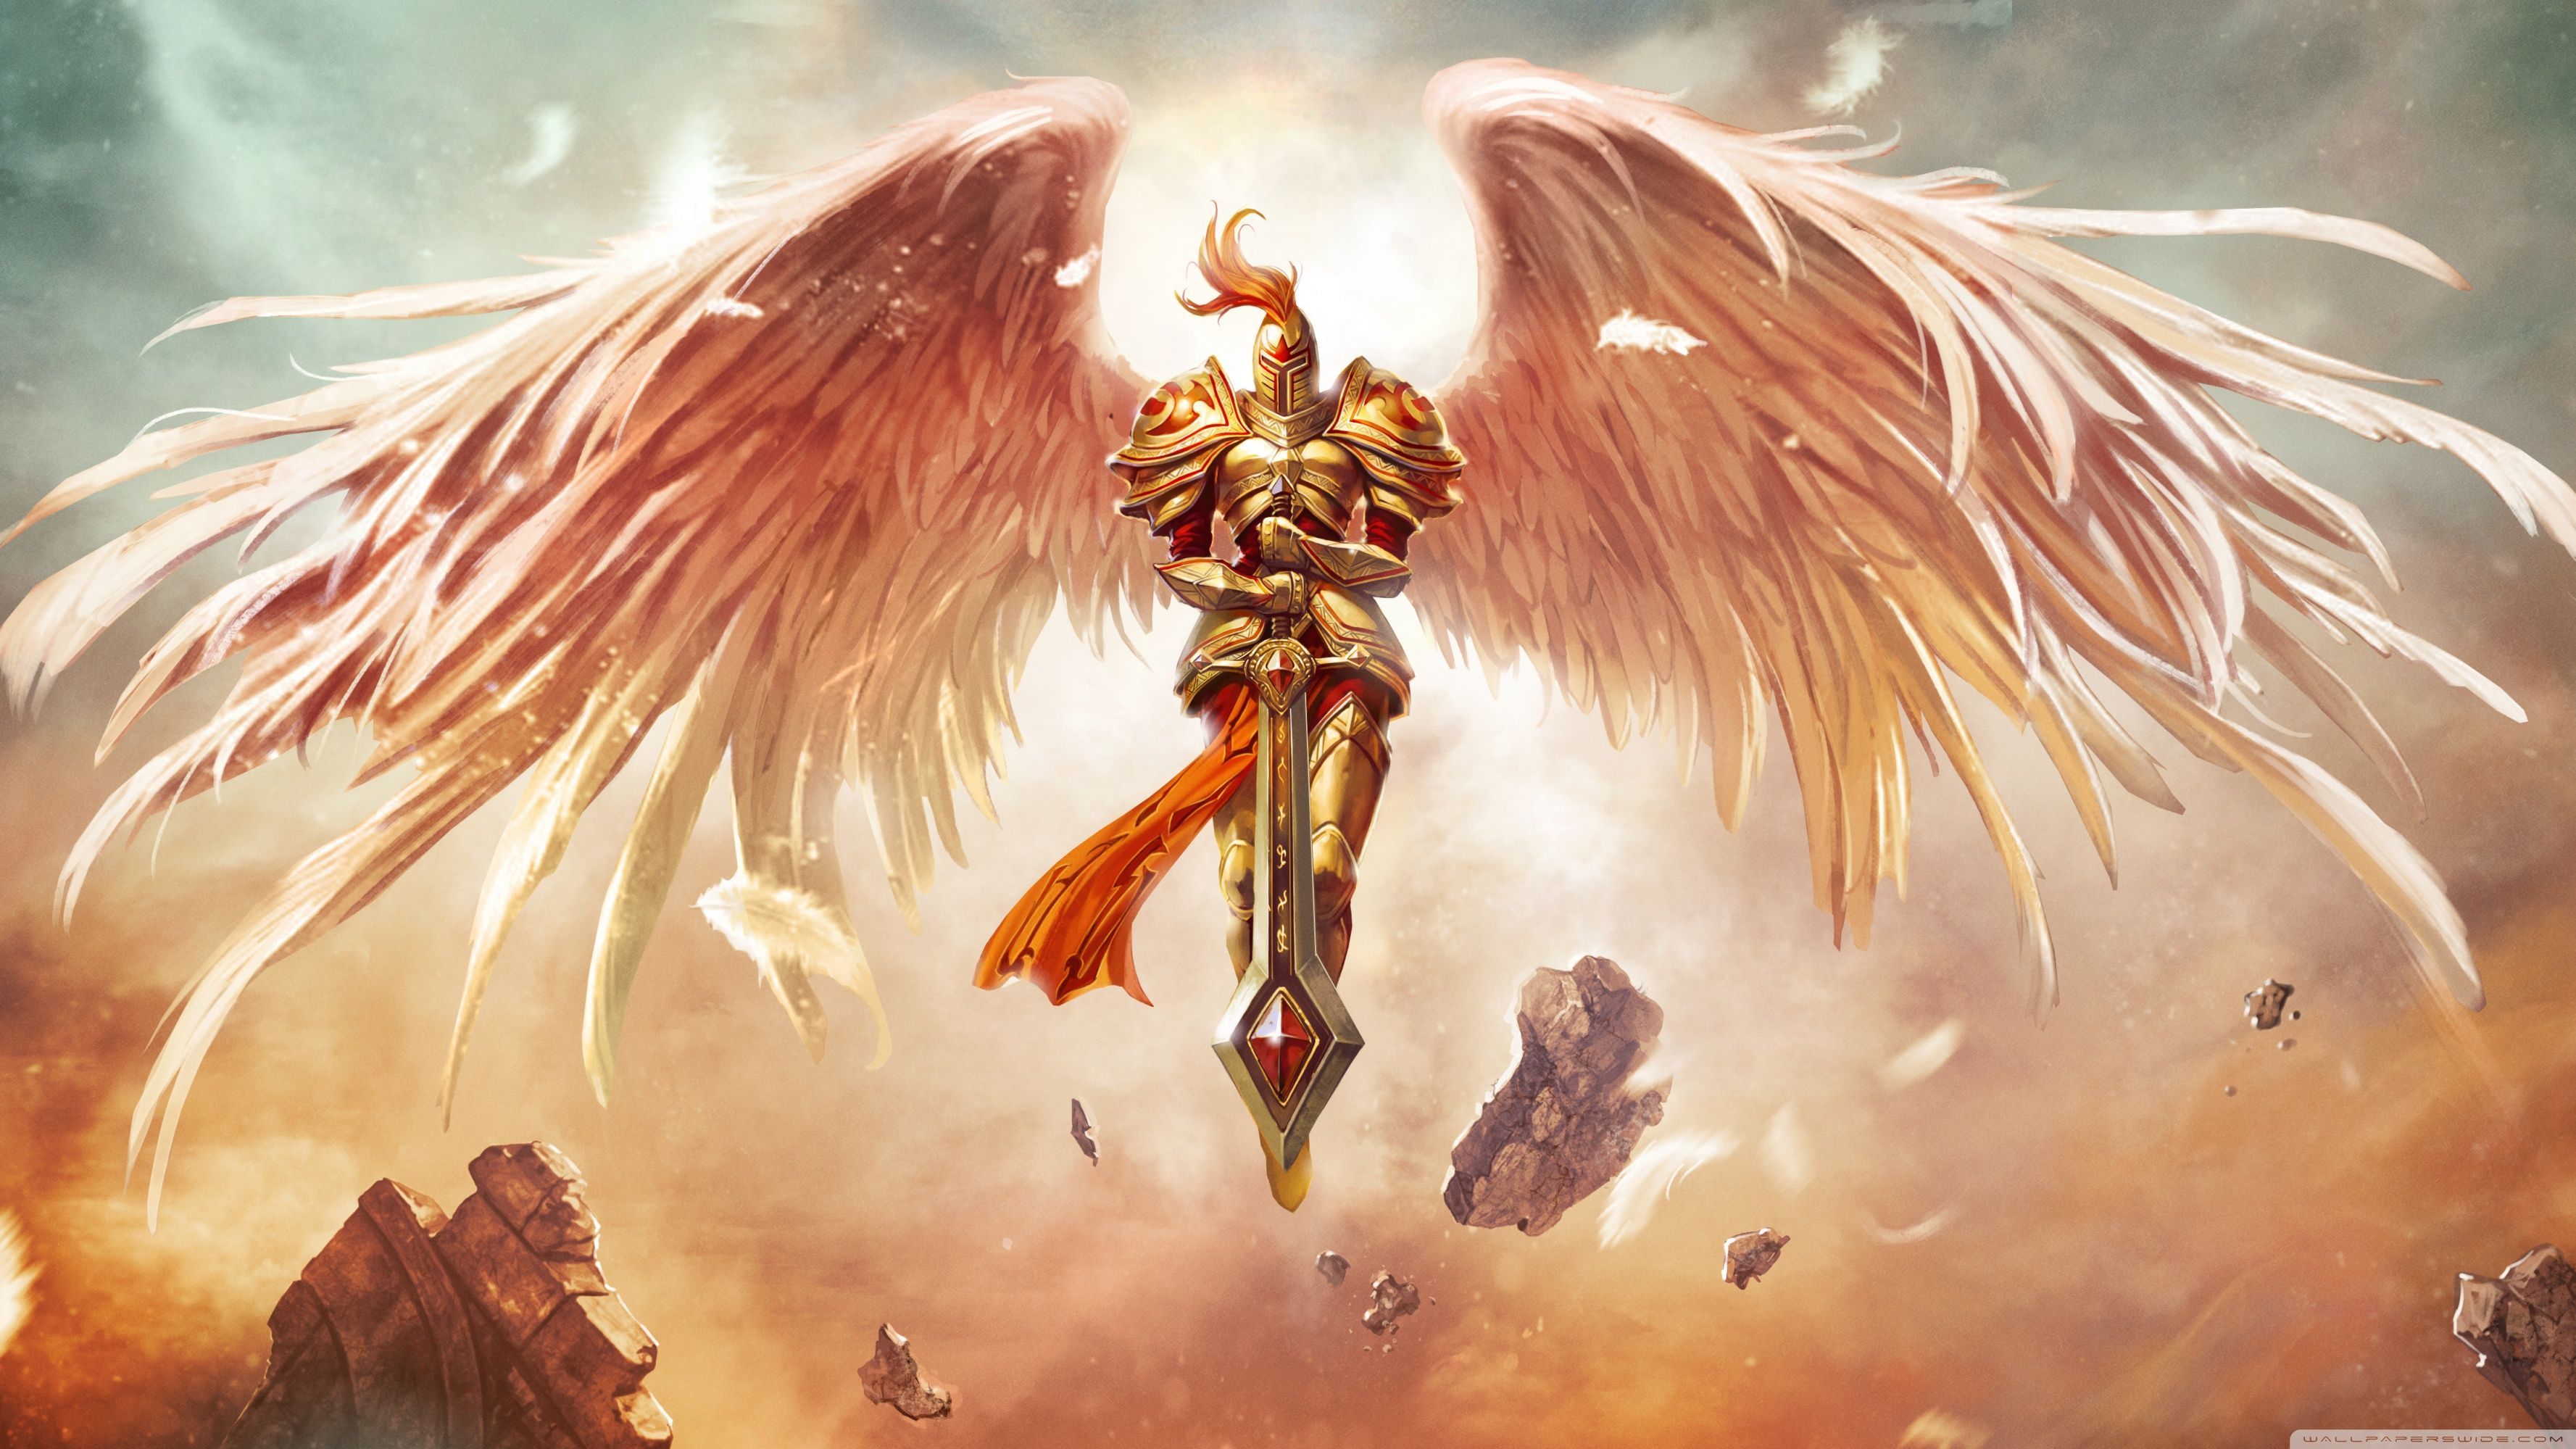 Popular Religious Posters St Michael The Archangel Defend Us in Battle The  Catholic Gentleman Wallpaper Poster Decorative Painting Canvas Wall Art  Living Room Posters Bedroom Painting 12x18inch30x  Amazonca Home